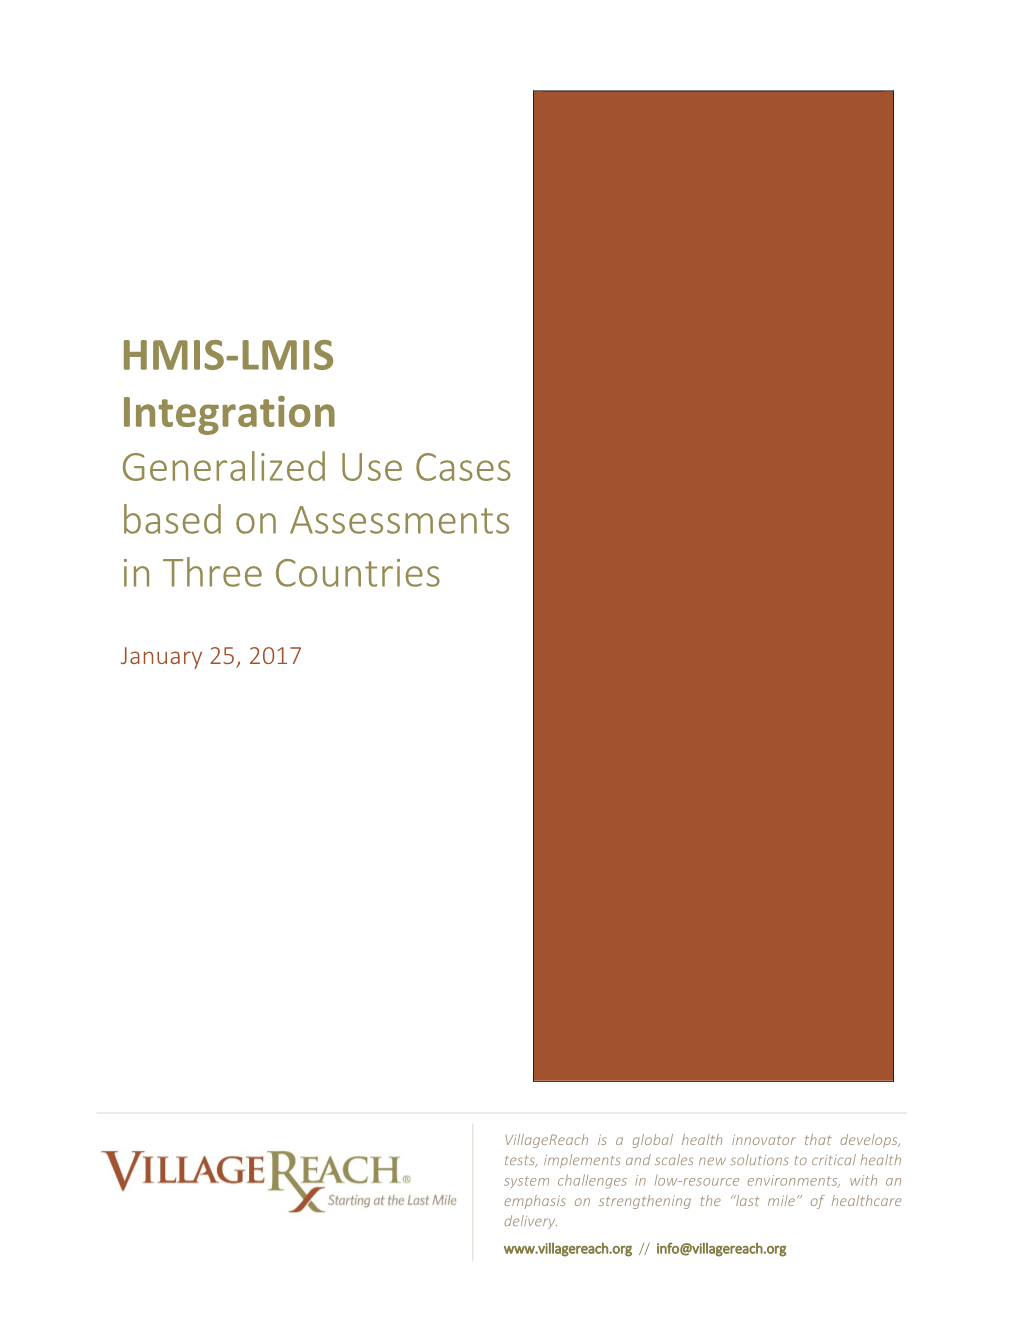 HMIS-LMIS Integration Generalized Use Cases Based on Assessments in Three Countries